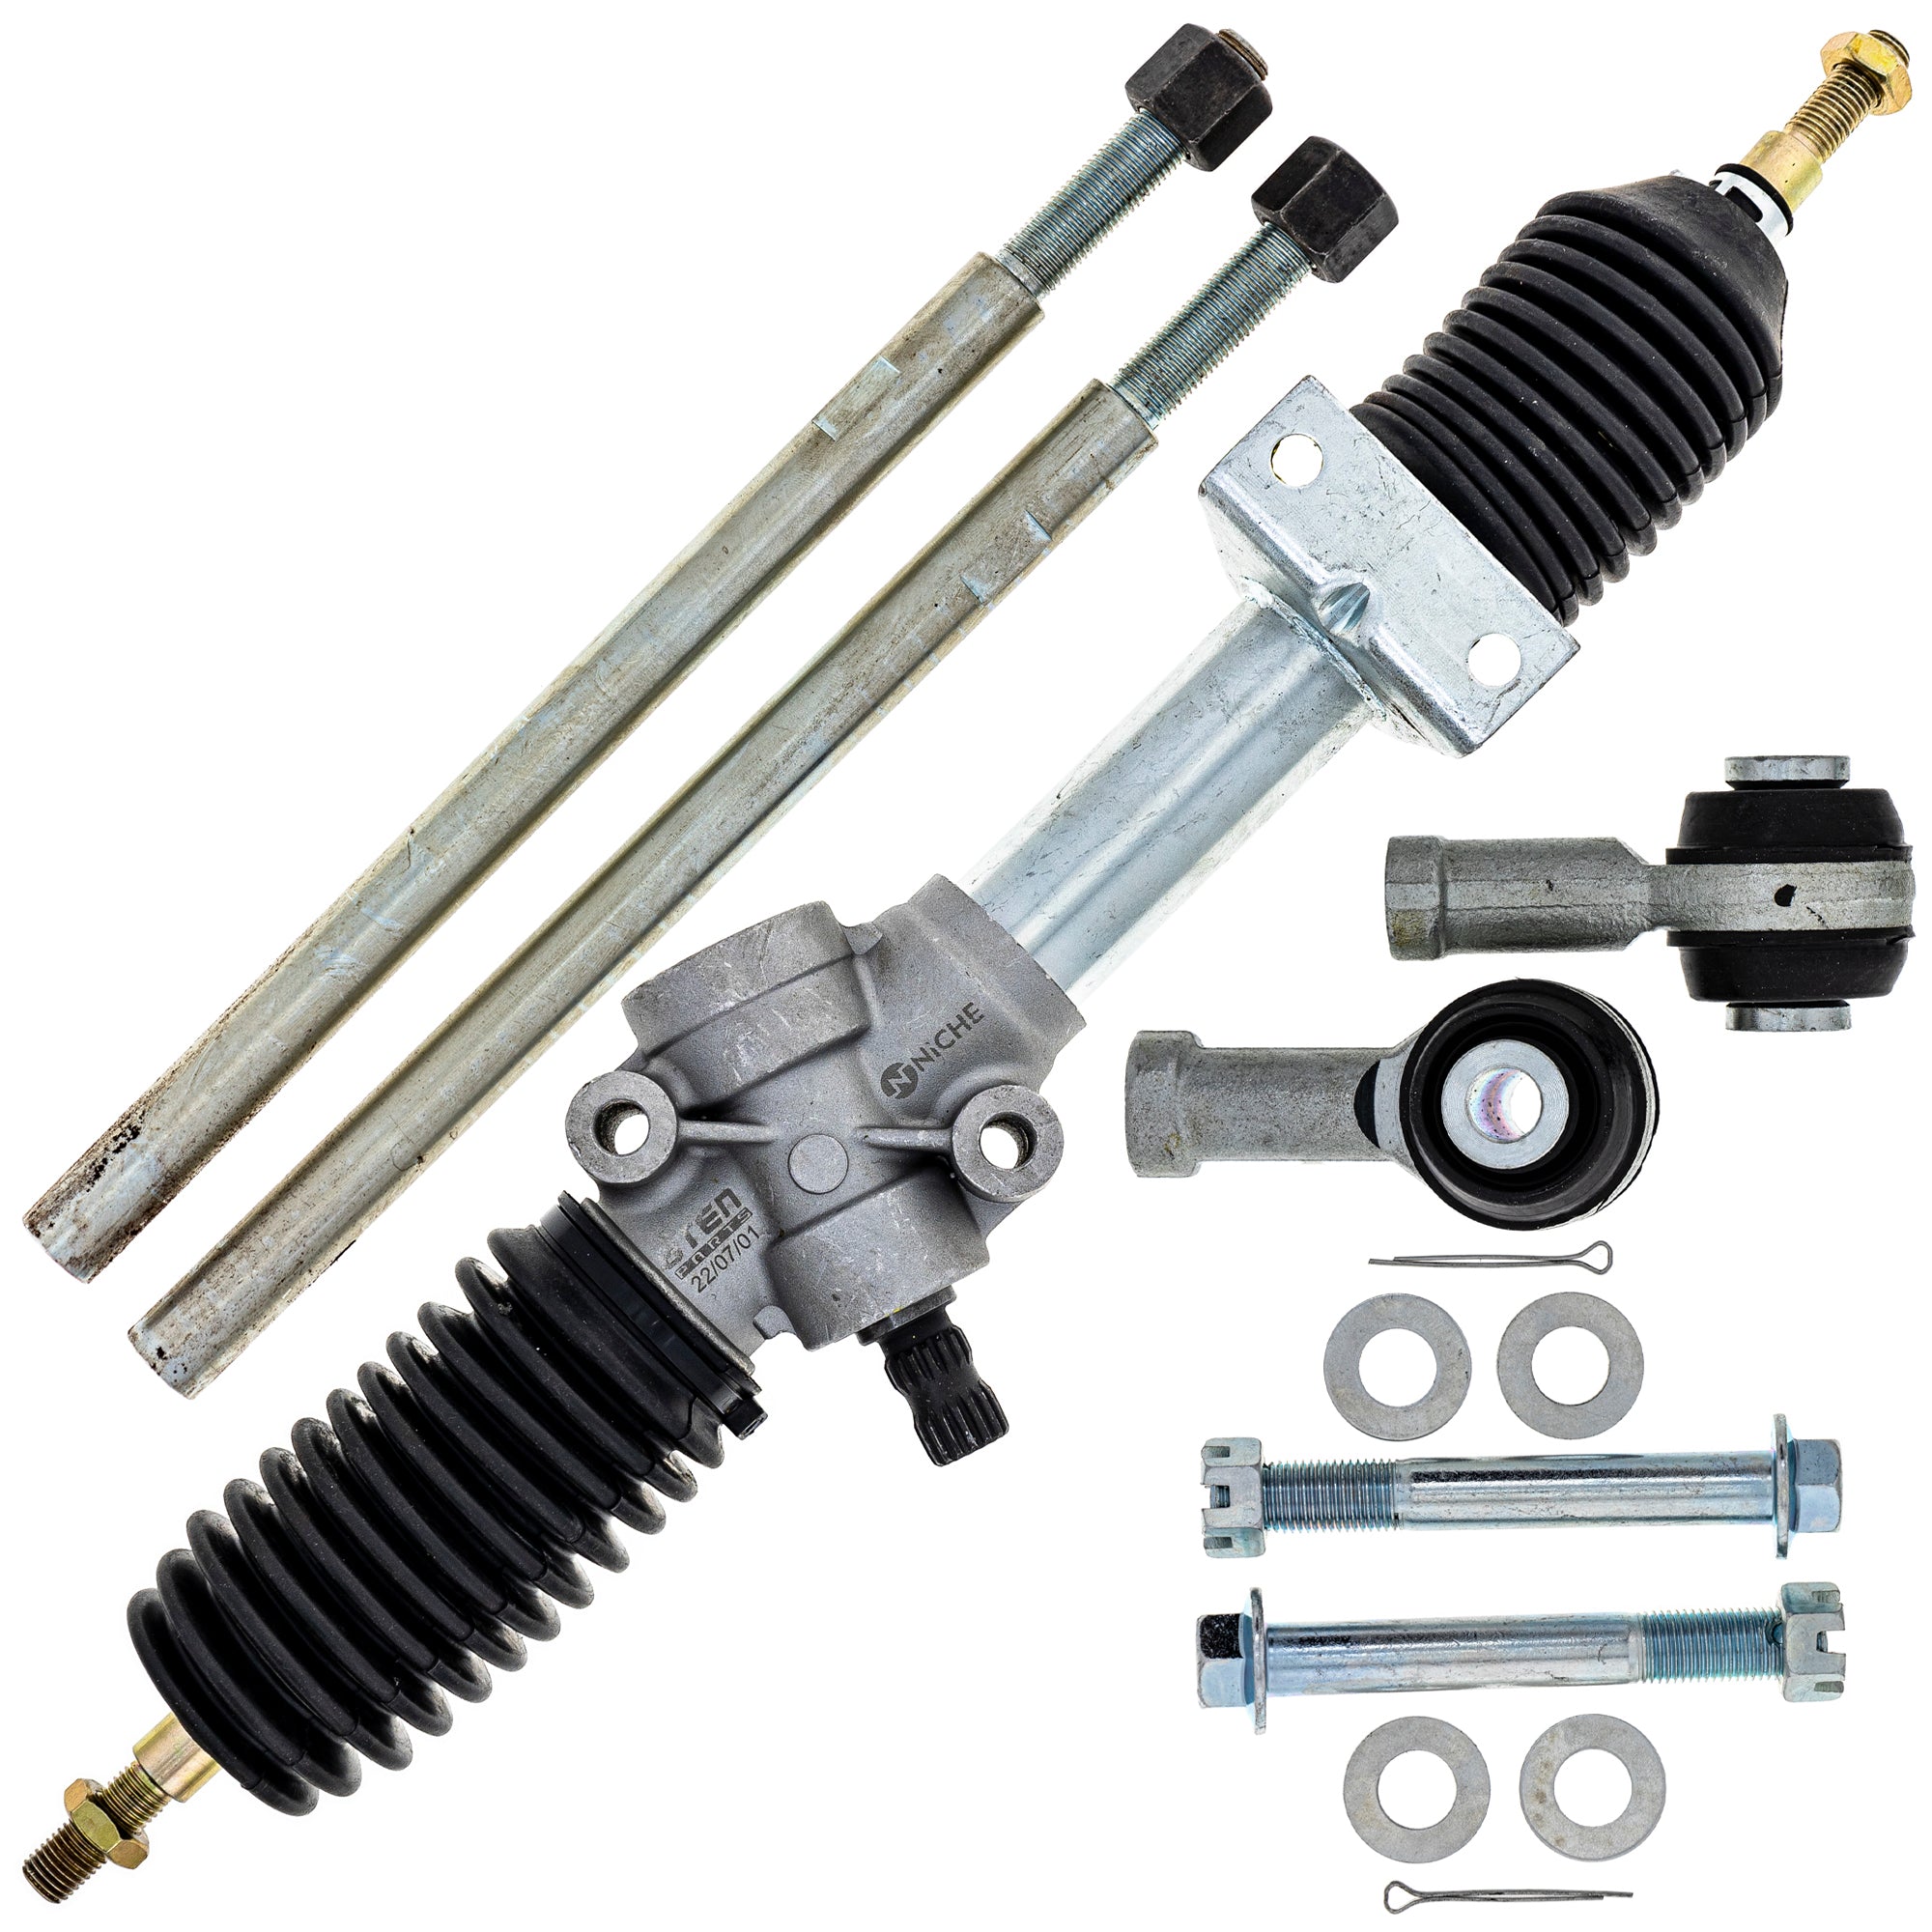 Steering Rack Assembly & Tie Rods Kit for BRP Can-Am Ski-Doo Sea-Doo Commander NICHE MK1009489